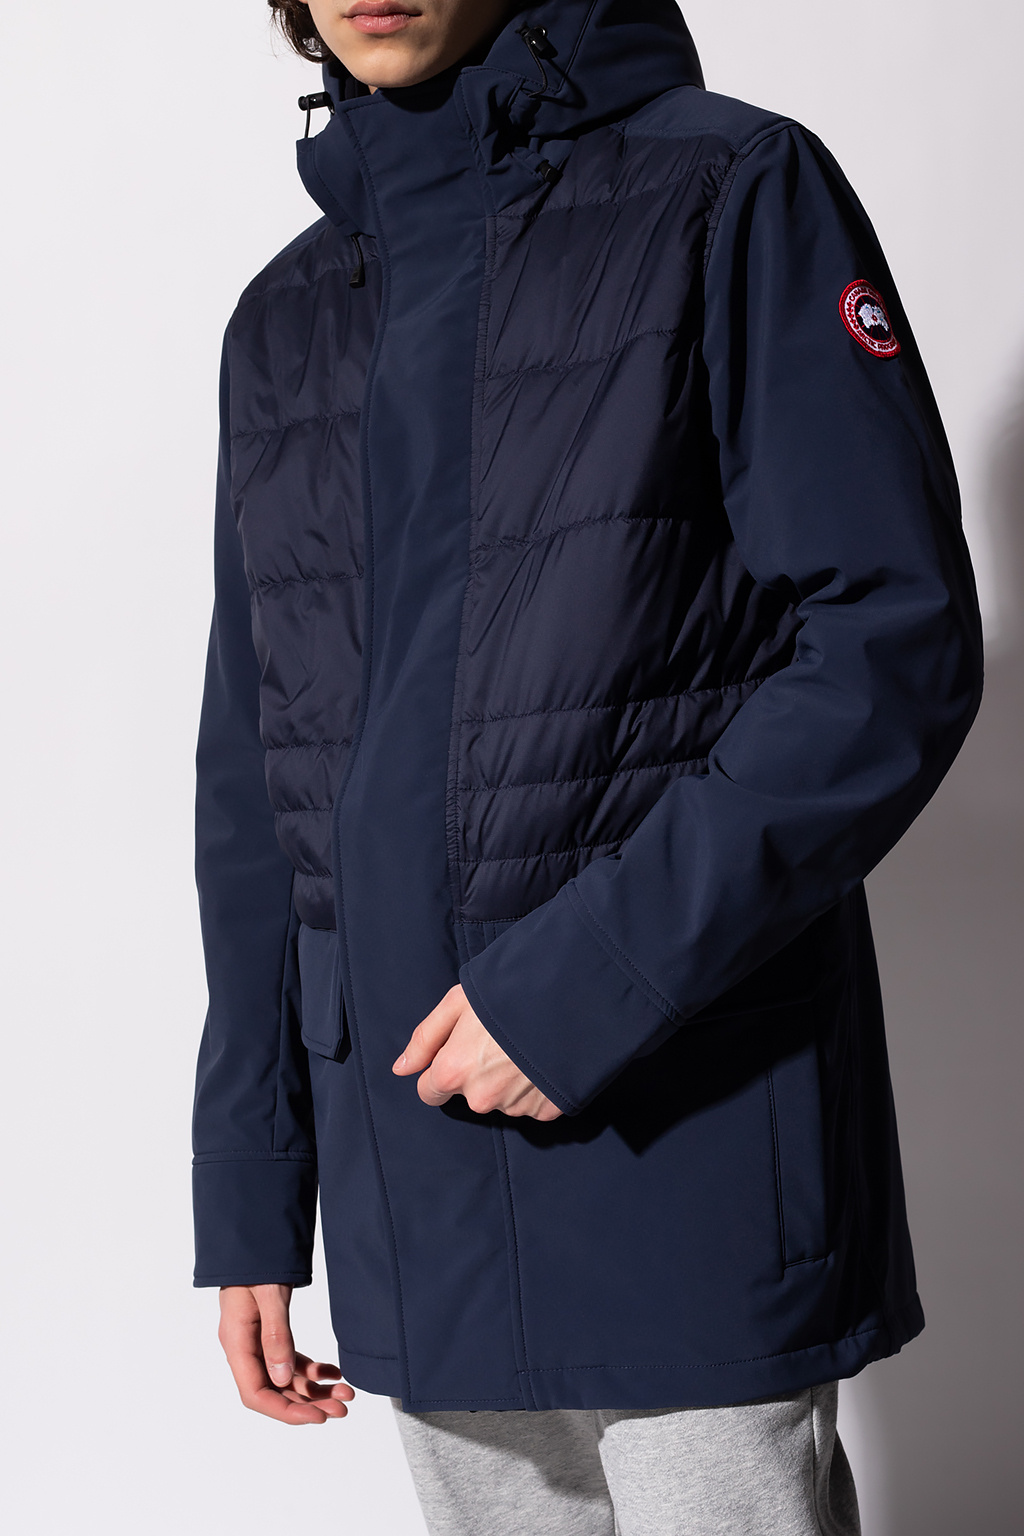 Canada Goose 'Breton' quilted down jacket | Men's Clothing | IetpShops